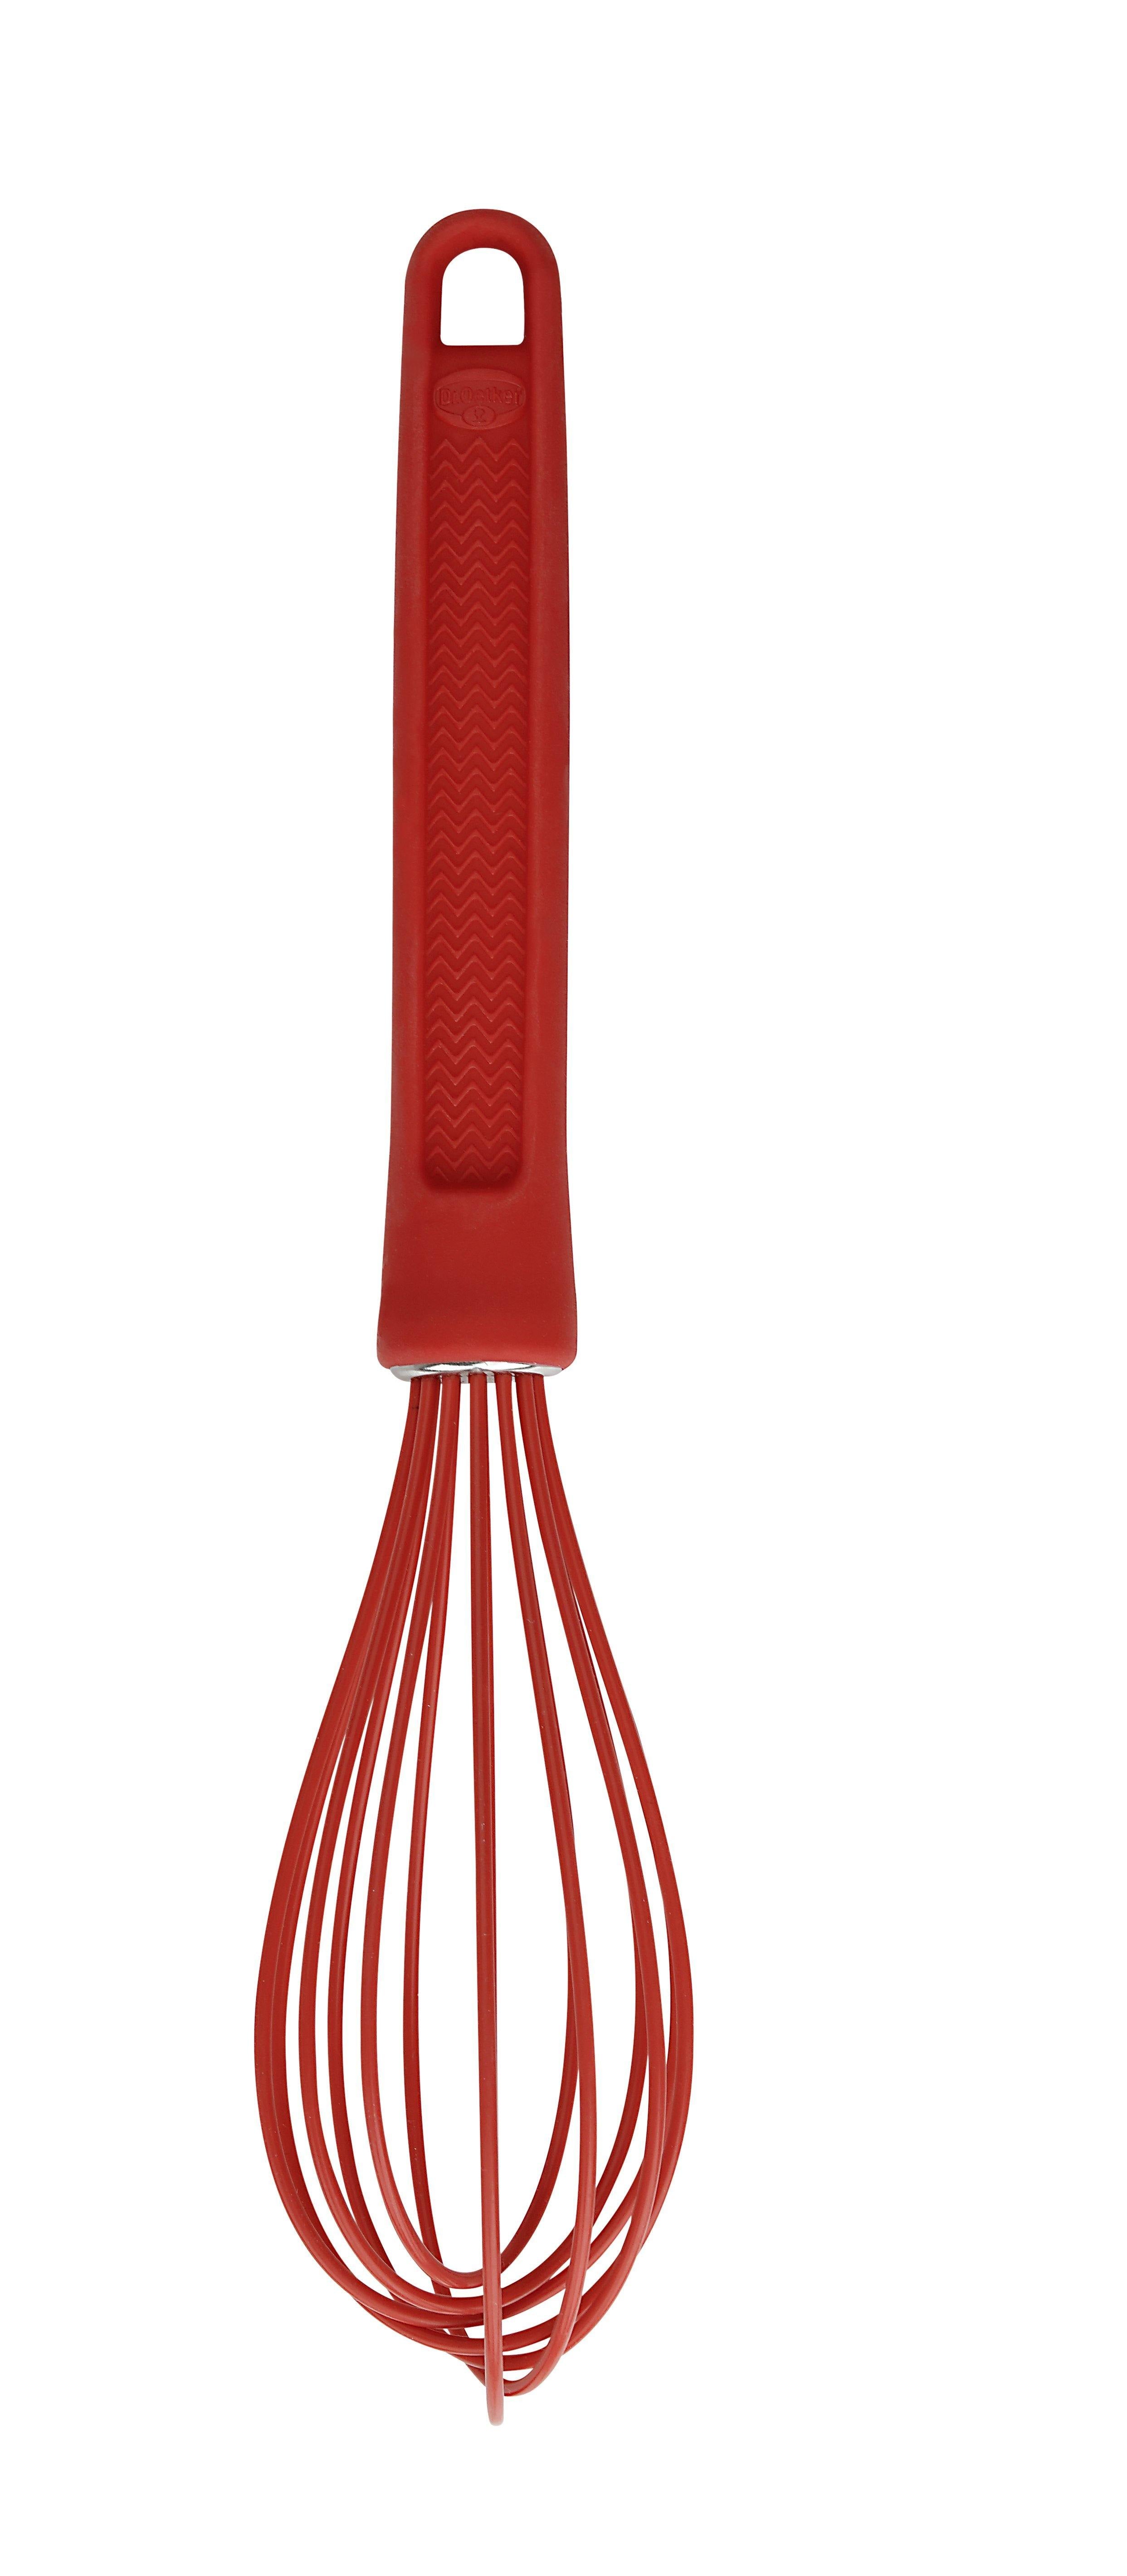 Dr. Oetker "Flexxibel Love" Silicone Egg Whisk, Red, 25 Cm - Whole and All